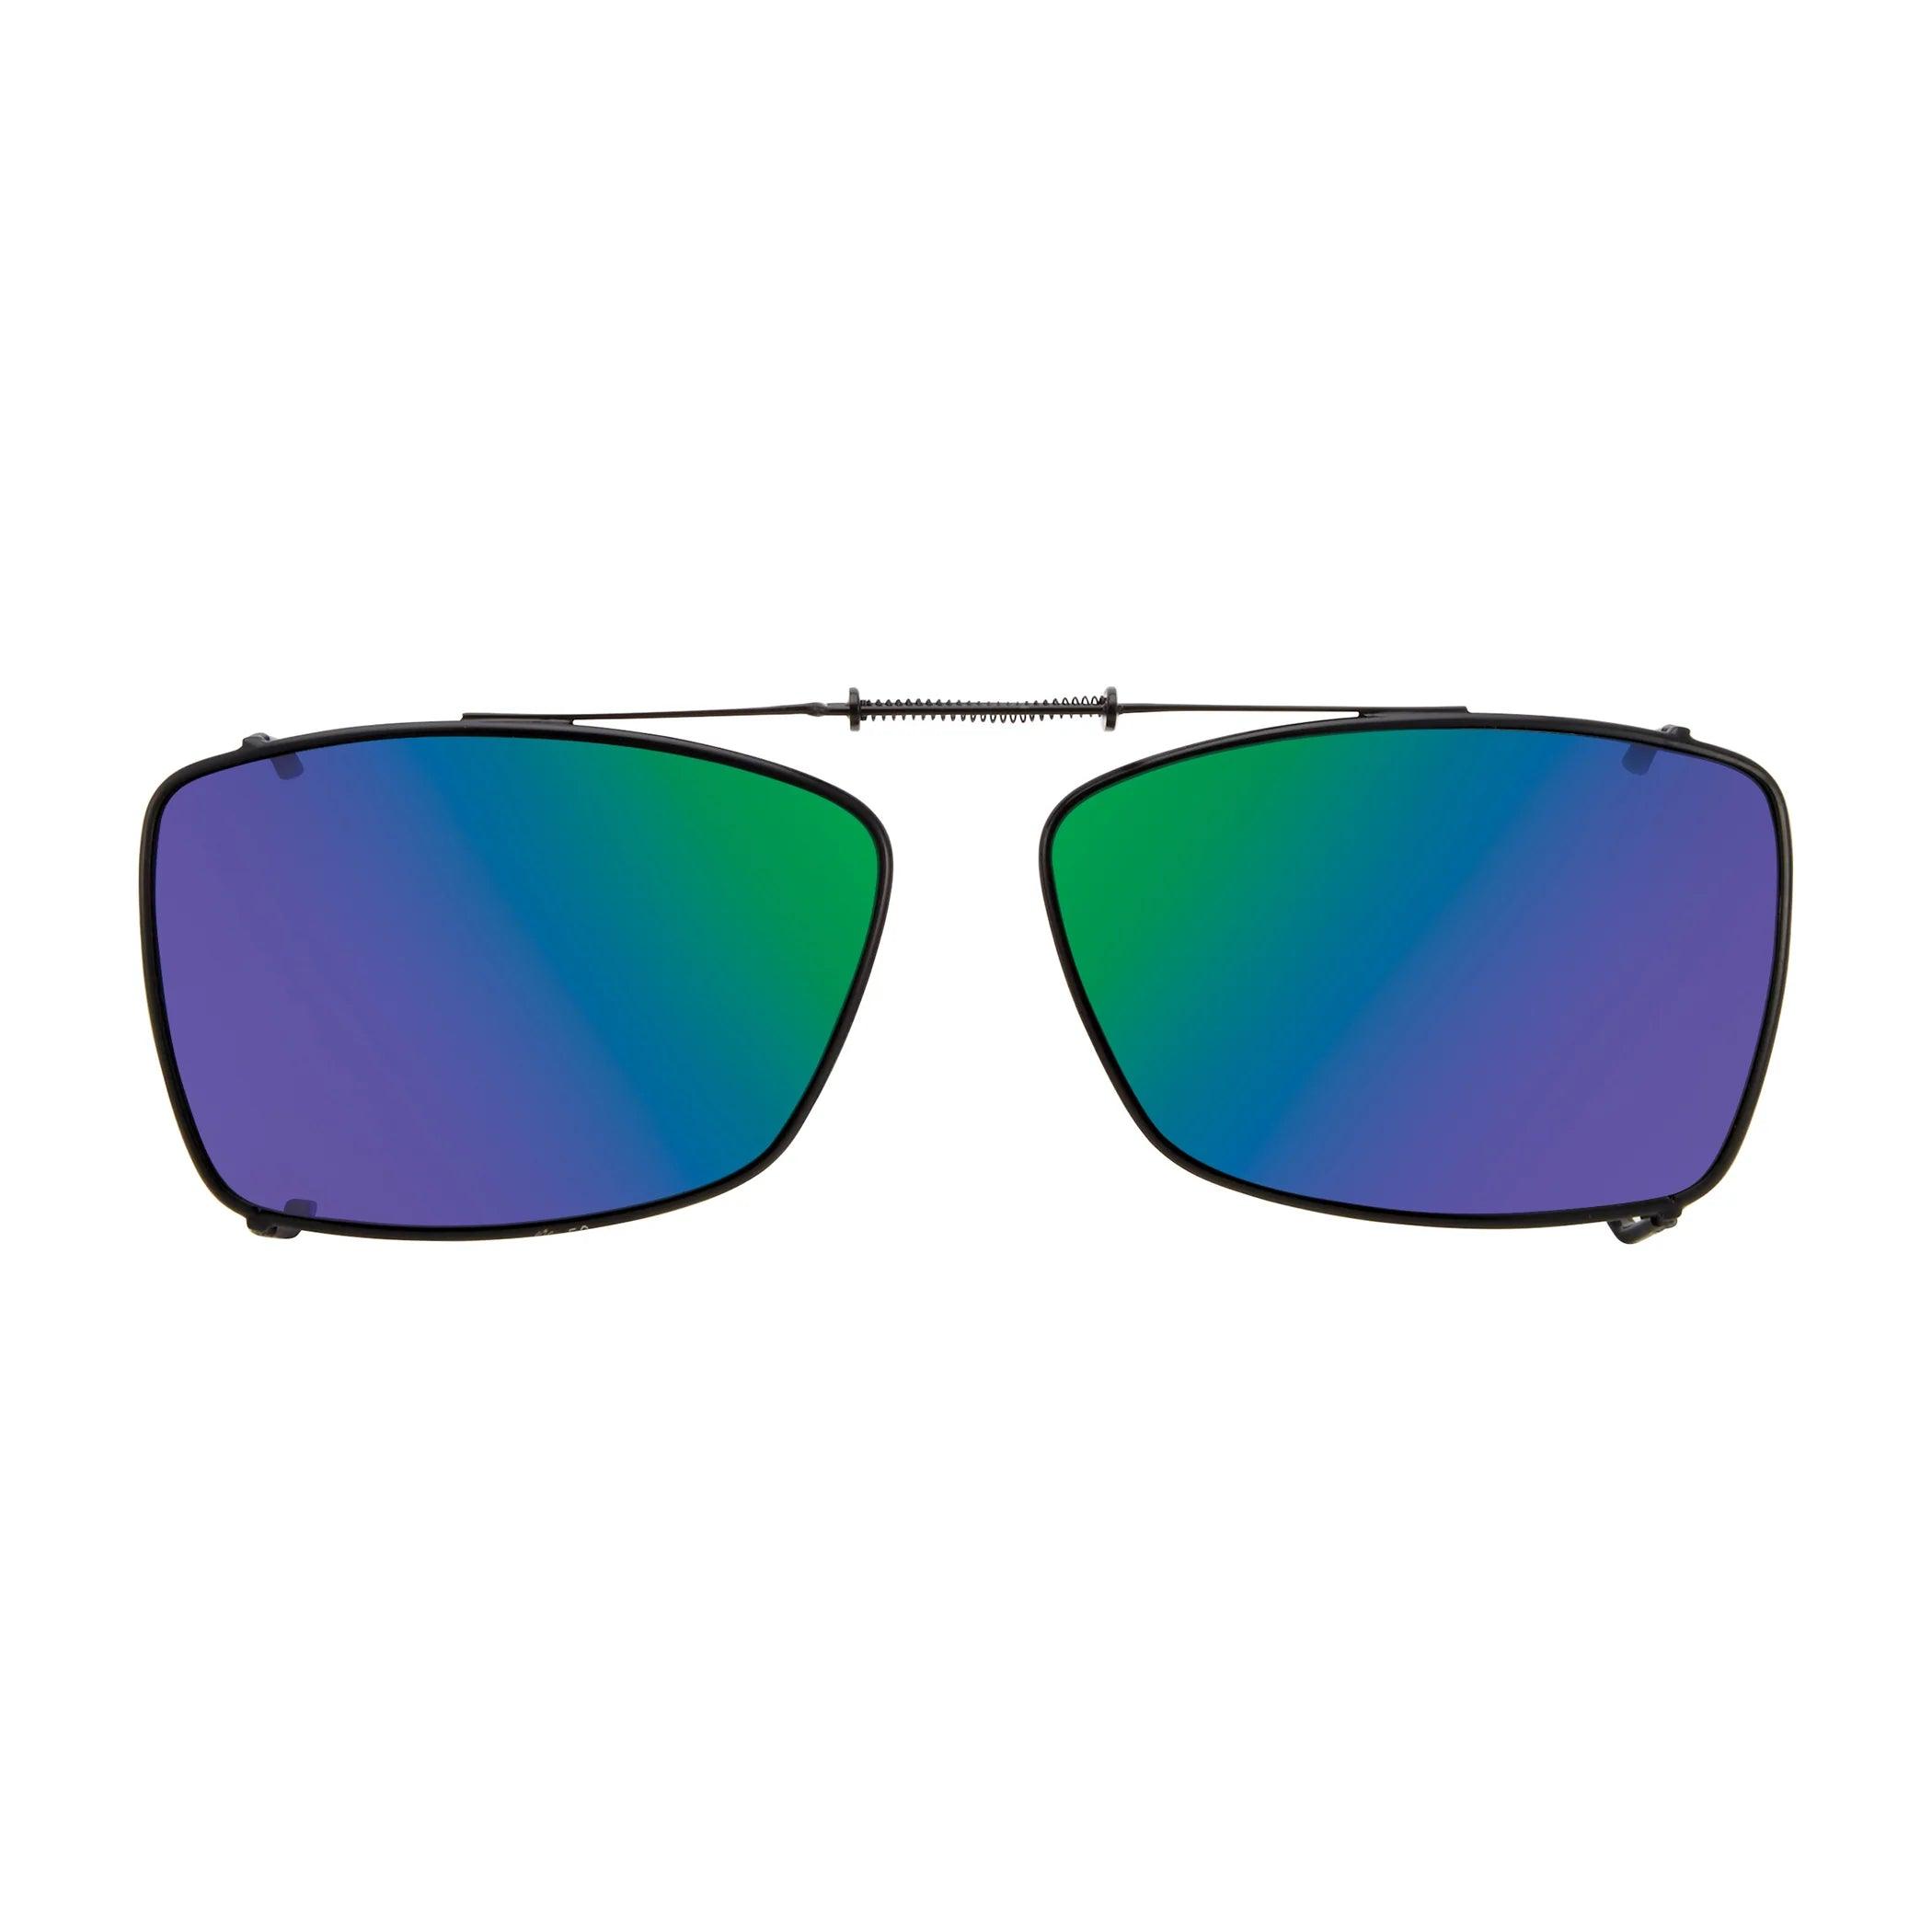 Wal Style, Polarized Clip On Sunglasses